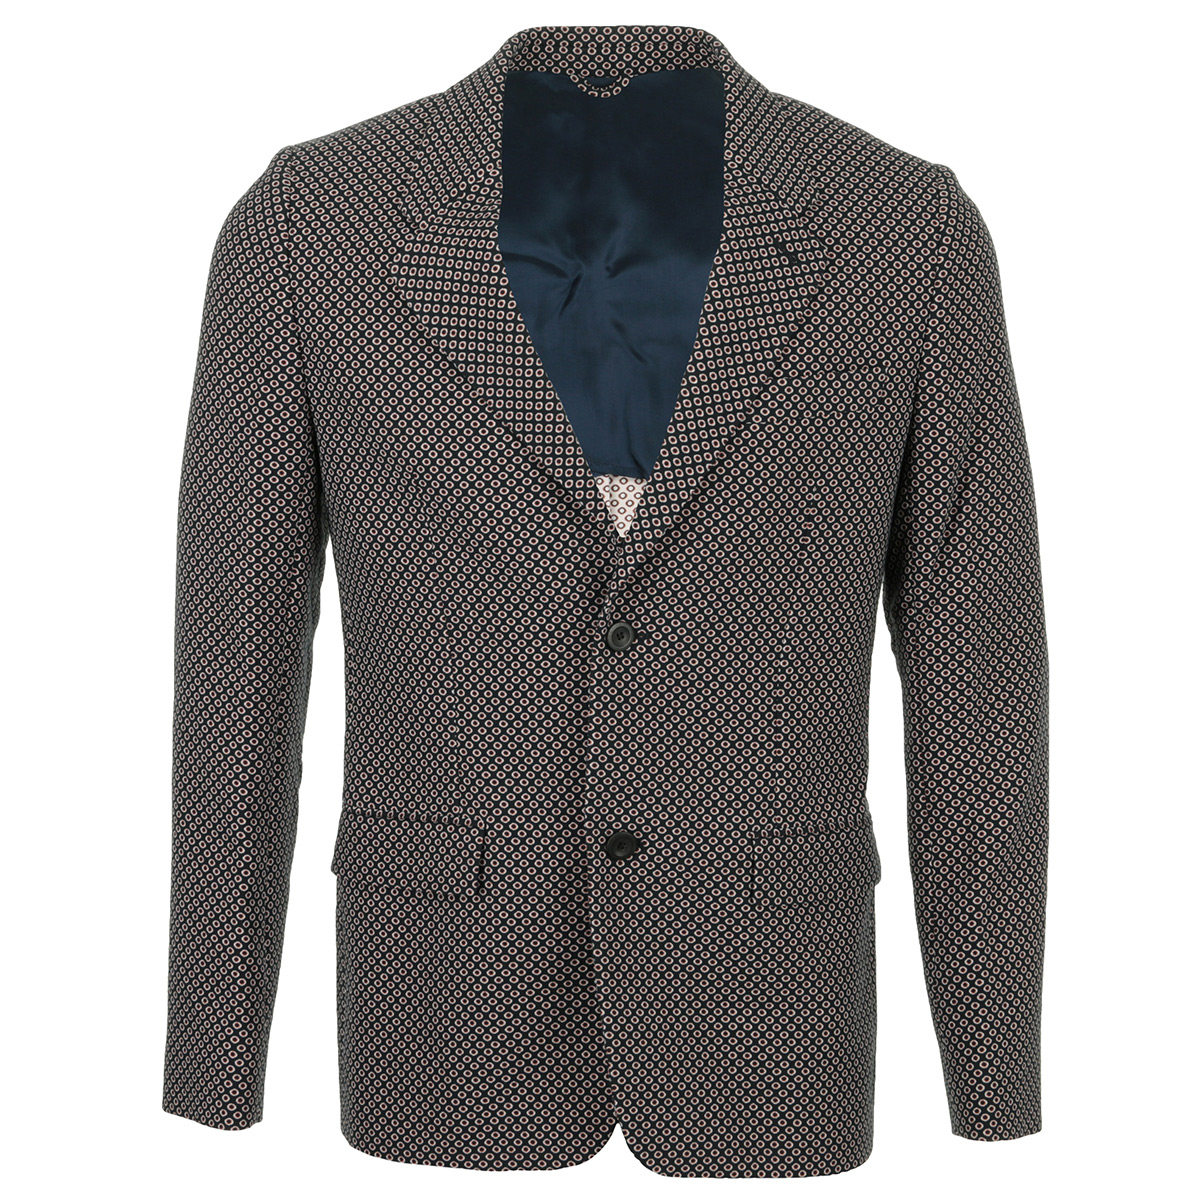 Éditions M.R Tailored Jacket